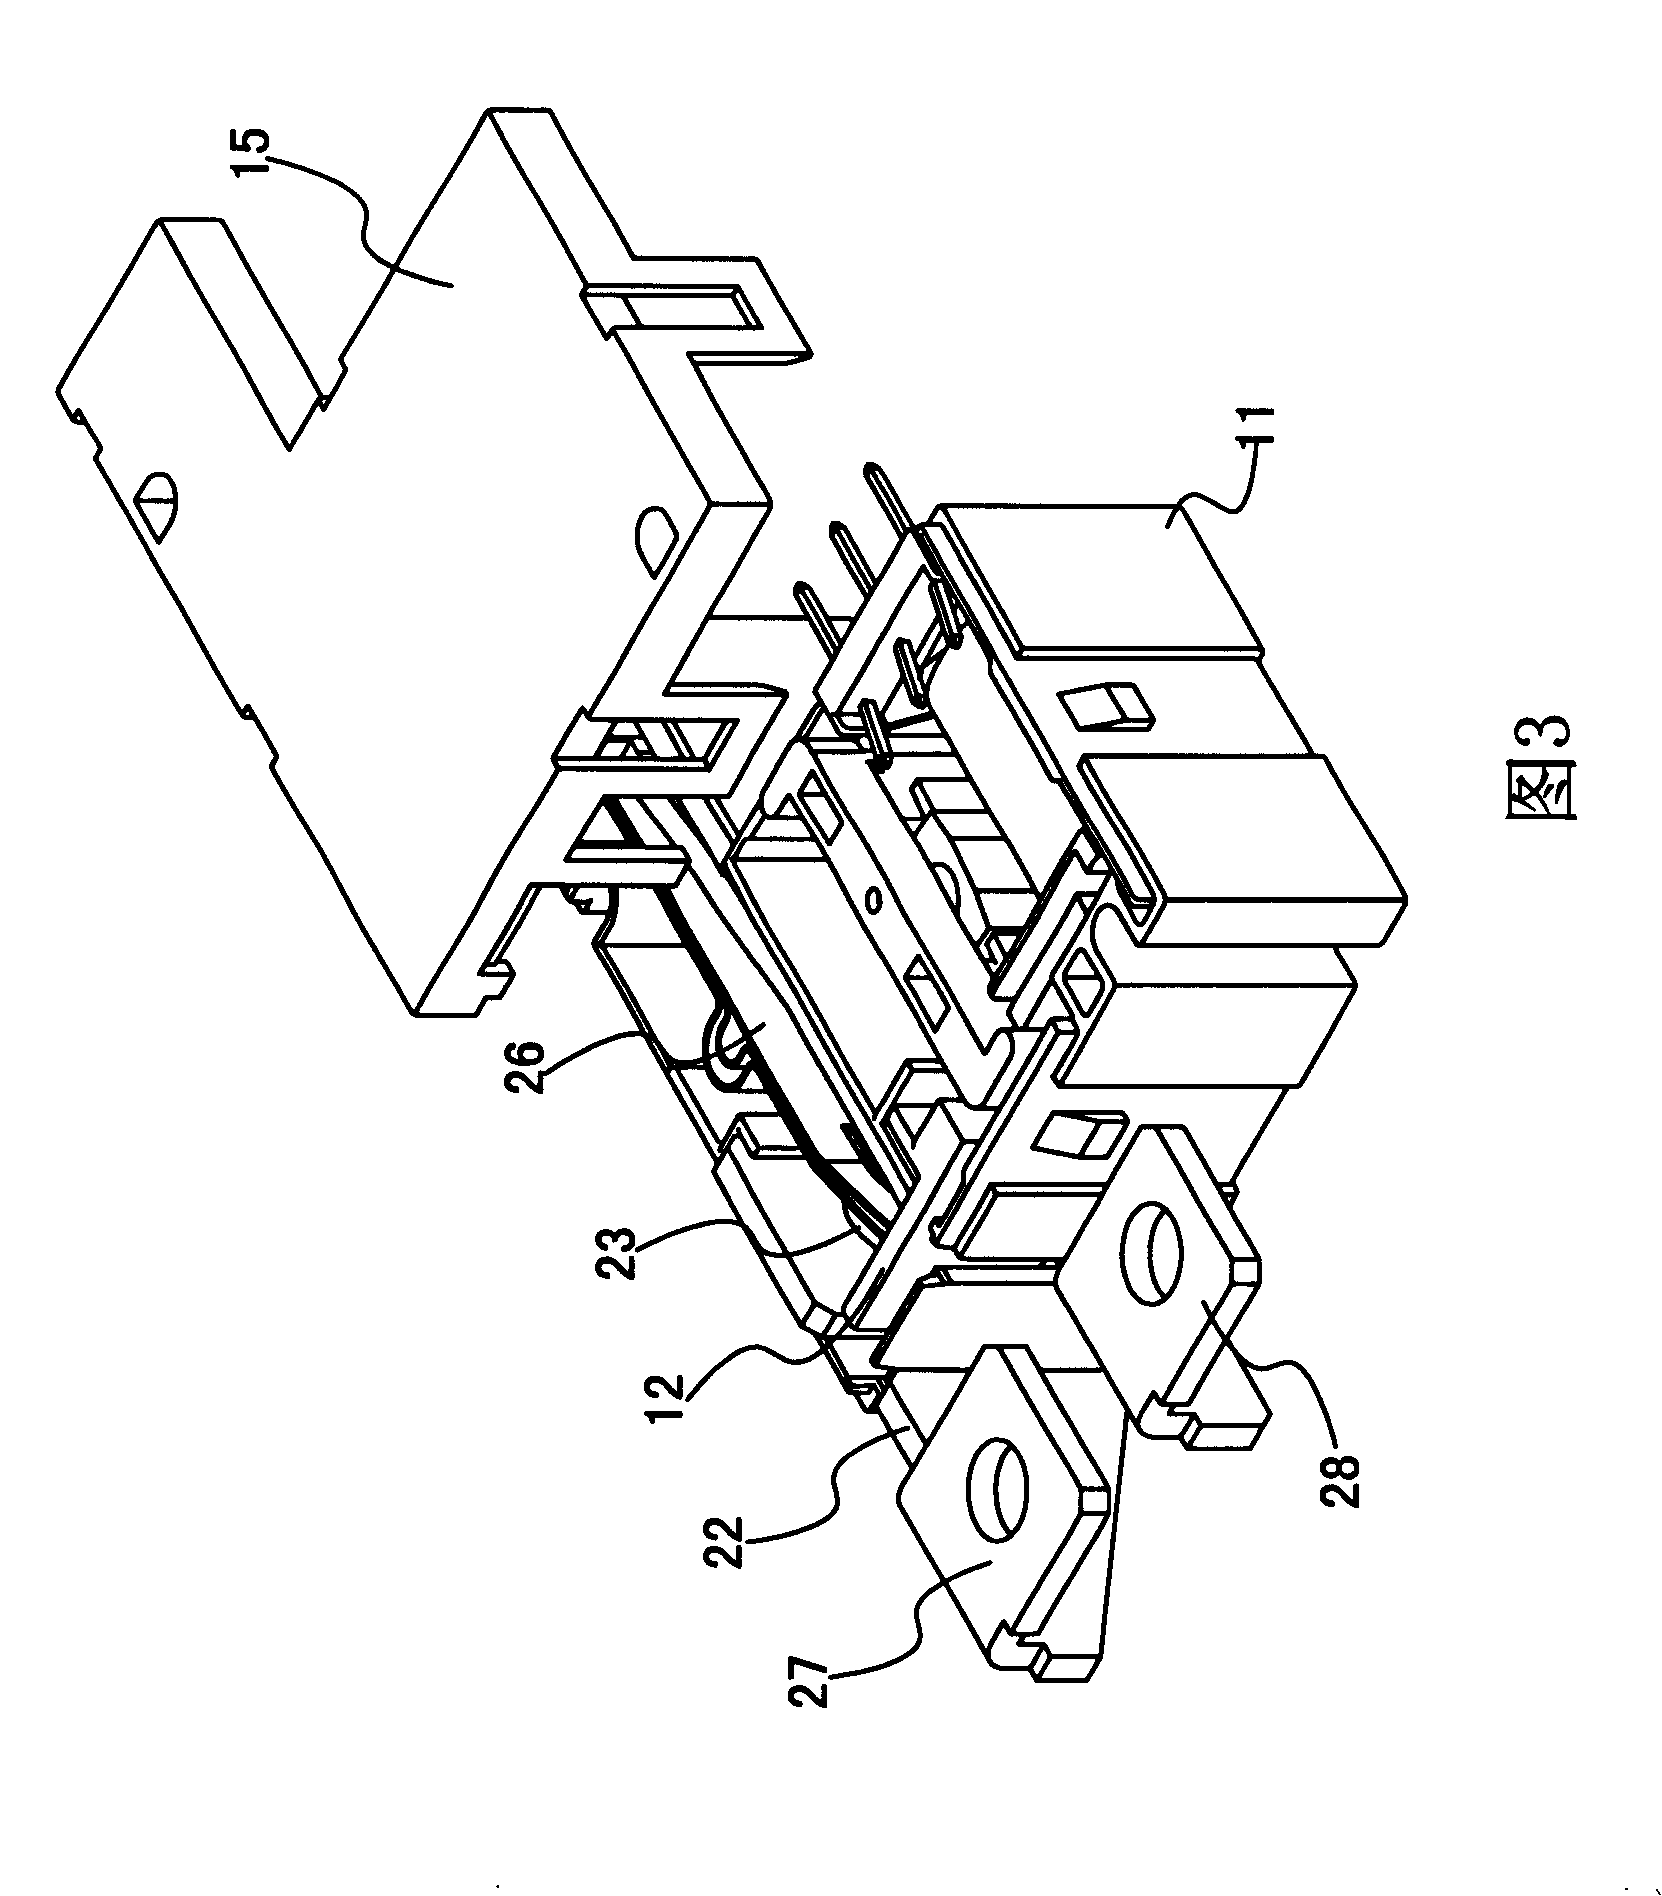 Electromagnetic relay resistant to electric repulsive force